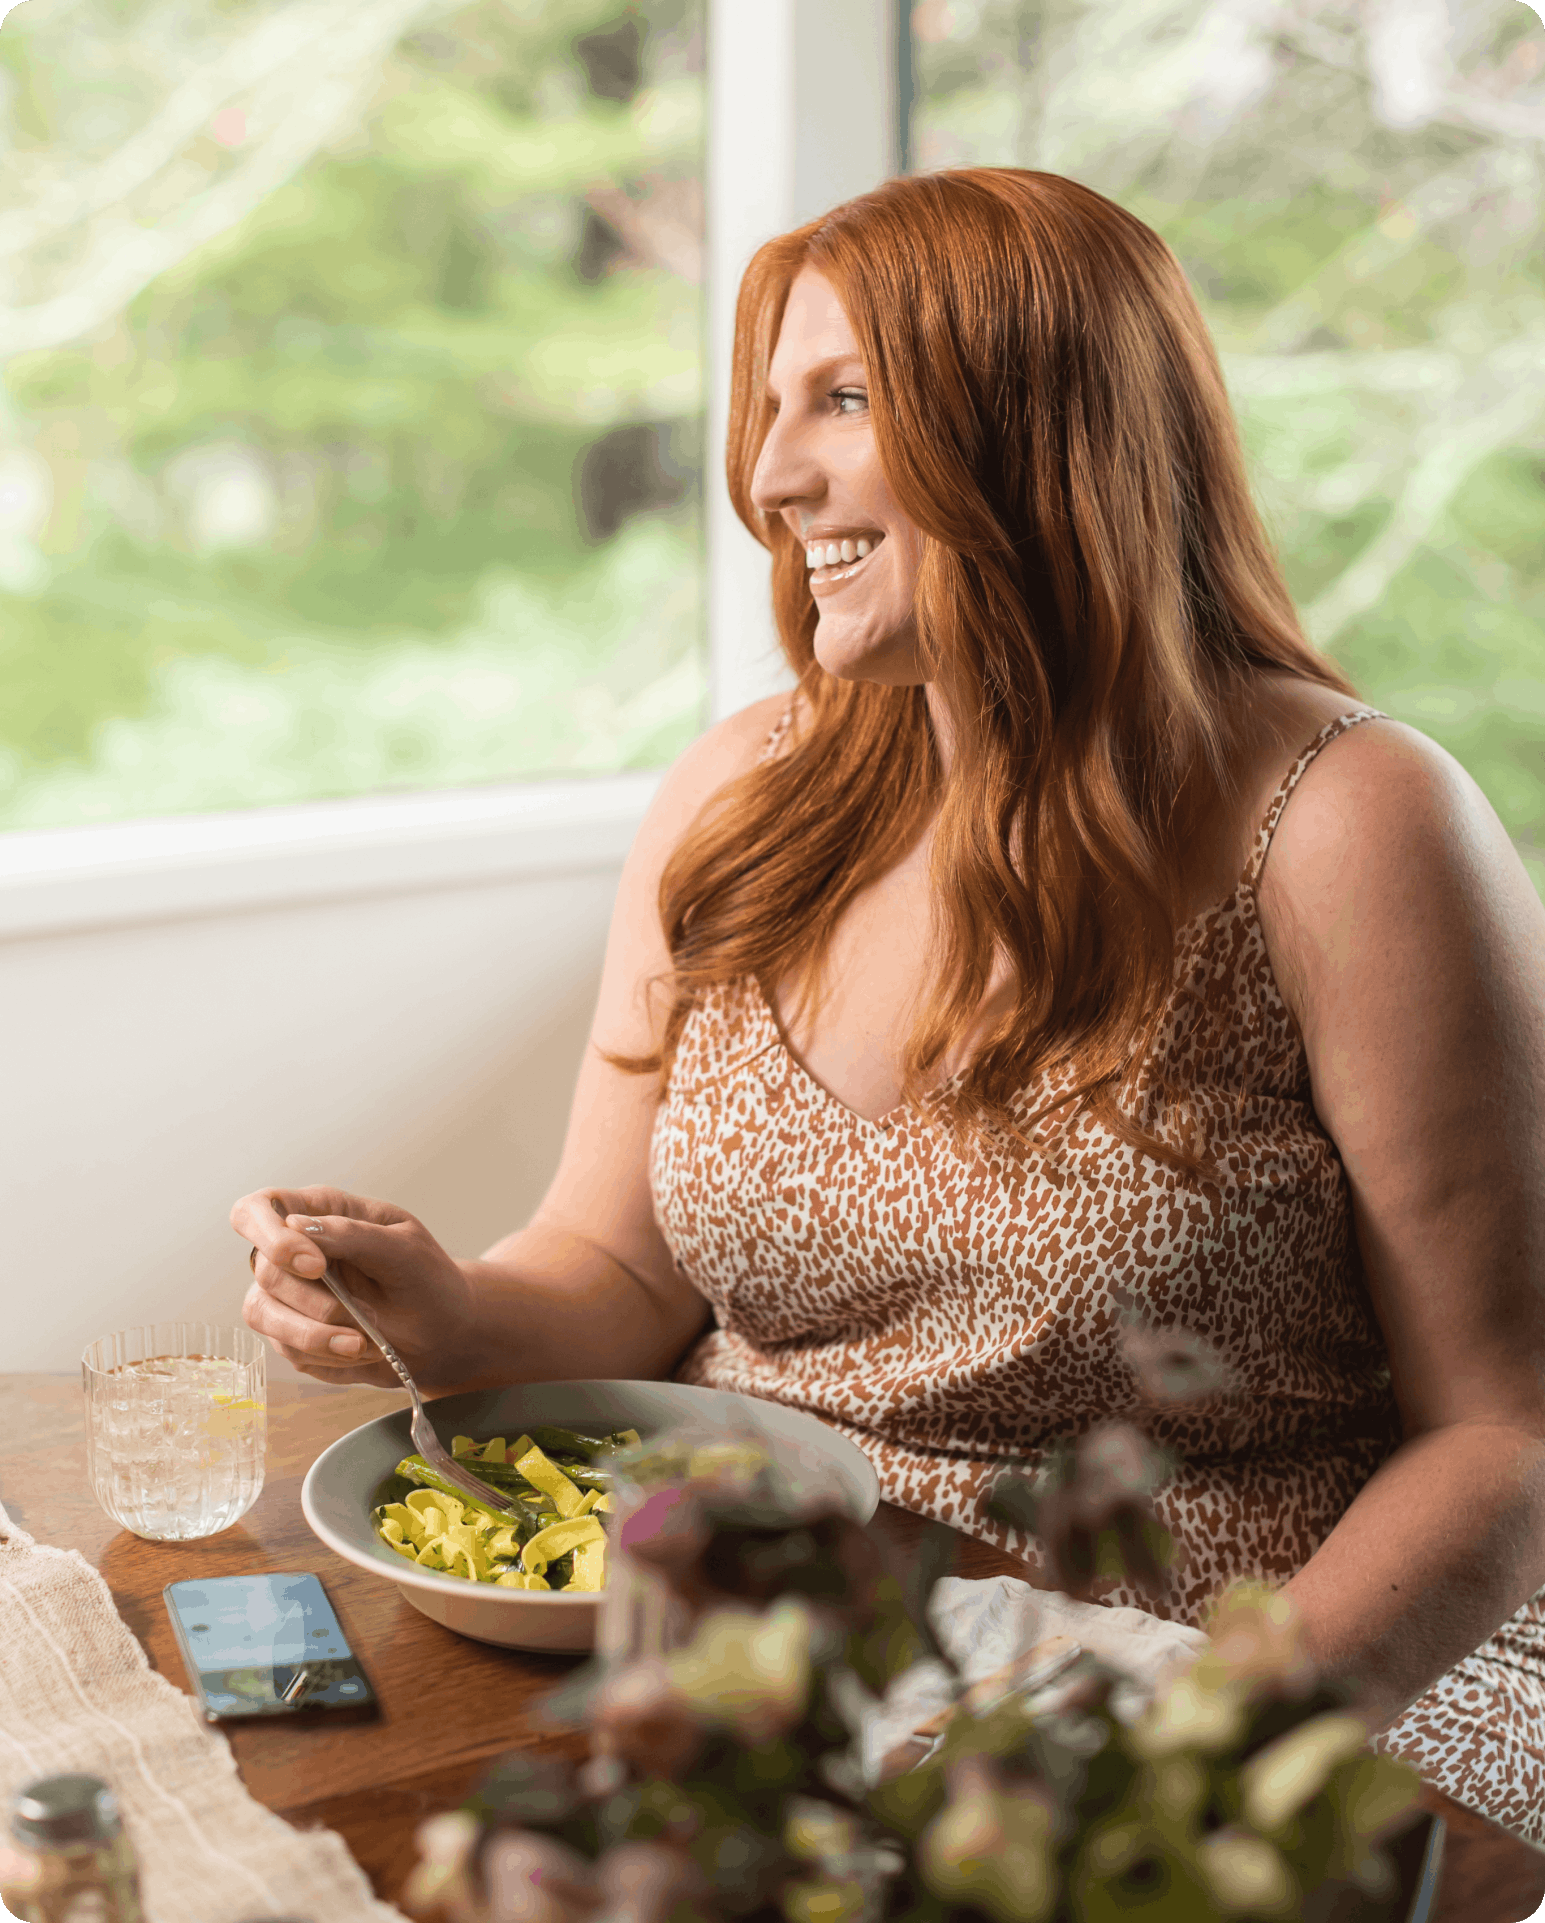 woman eating a salad by a window in natural light